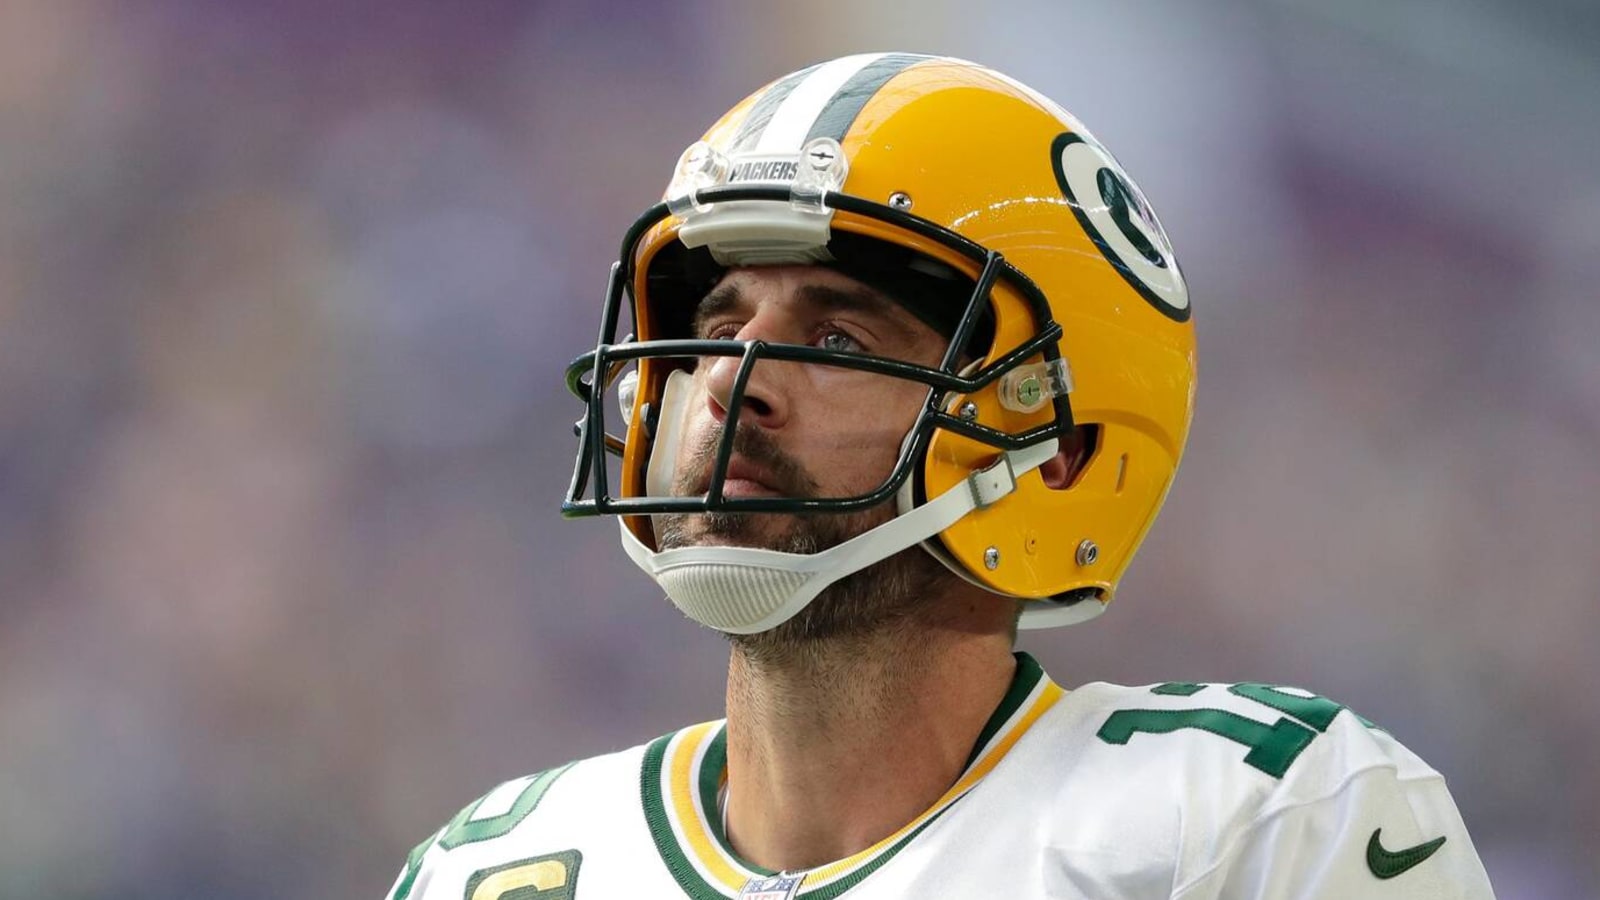 Carton links Packers' Rodgers with 49ers amid Jets uncertainty